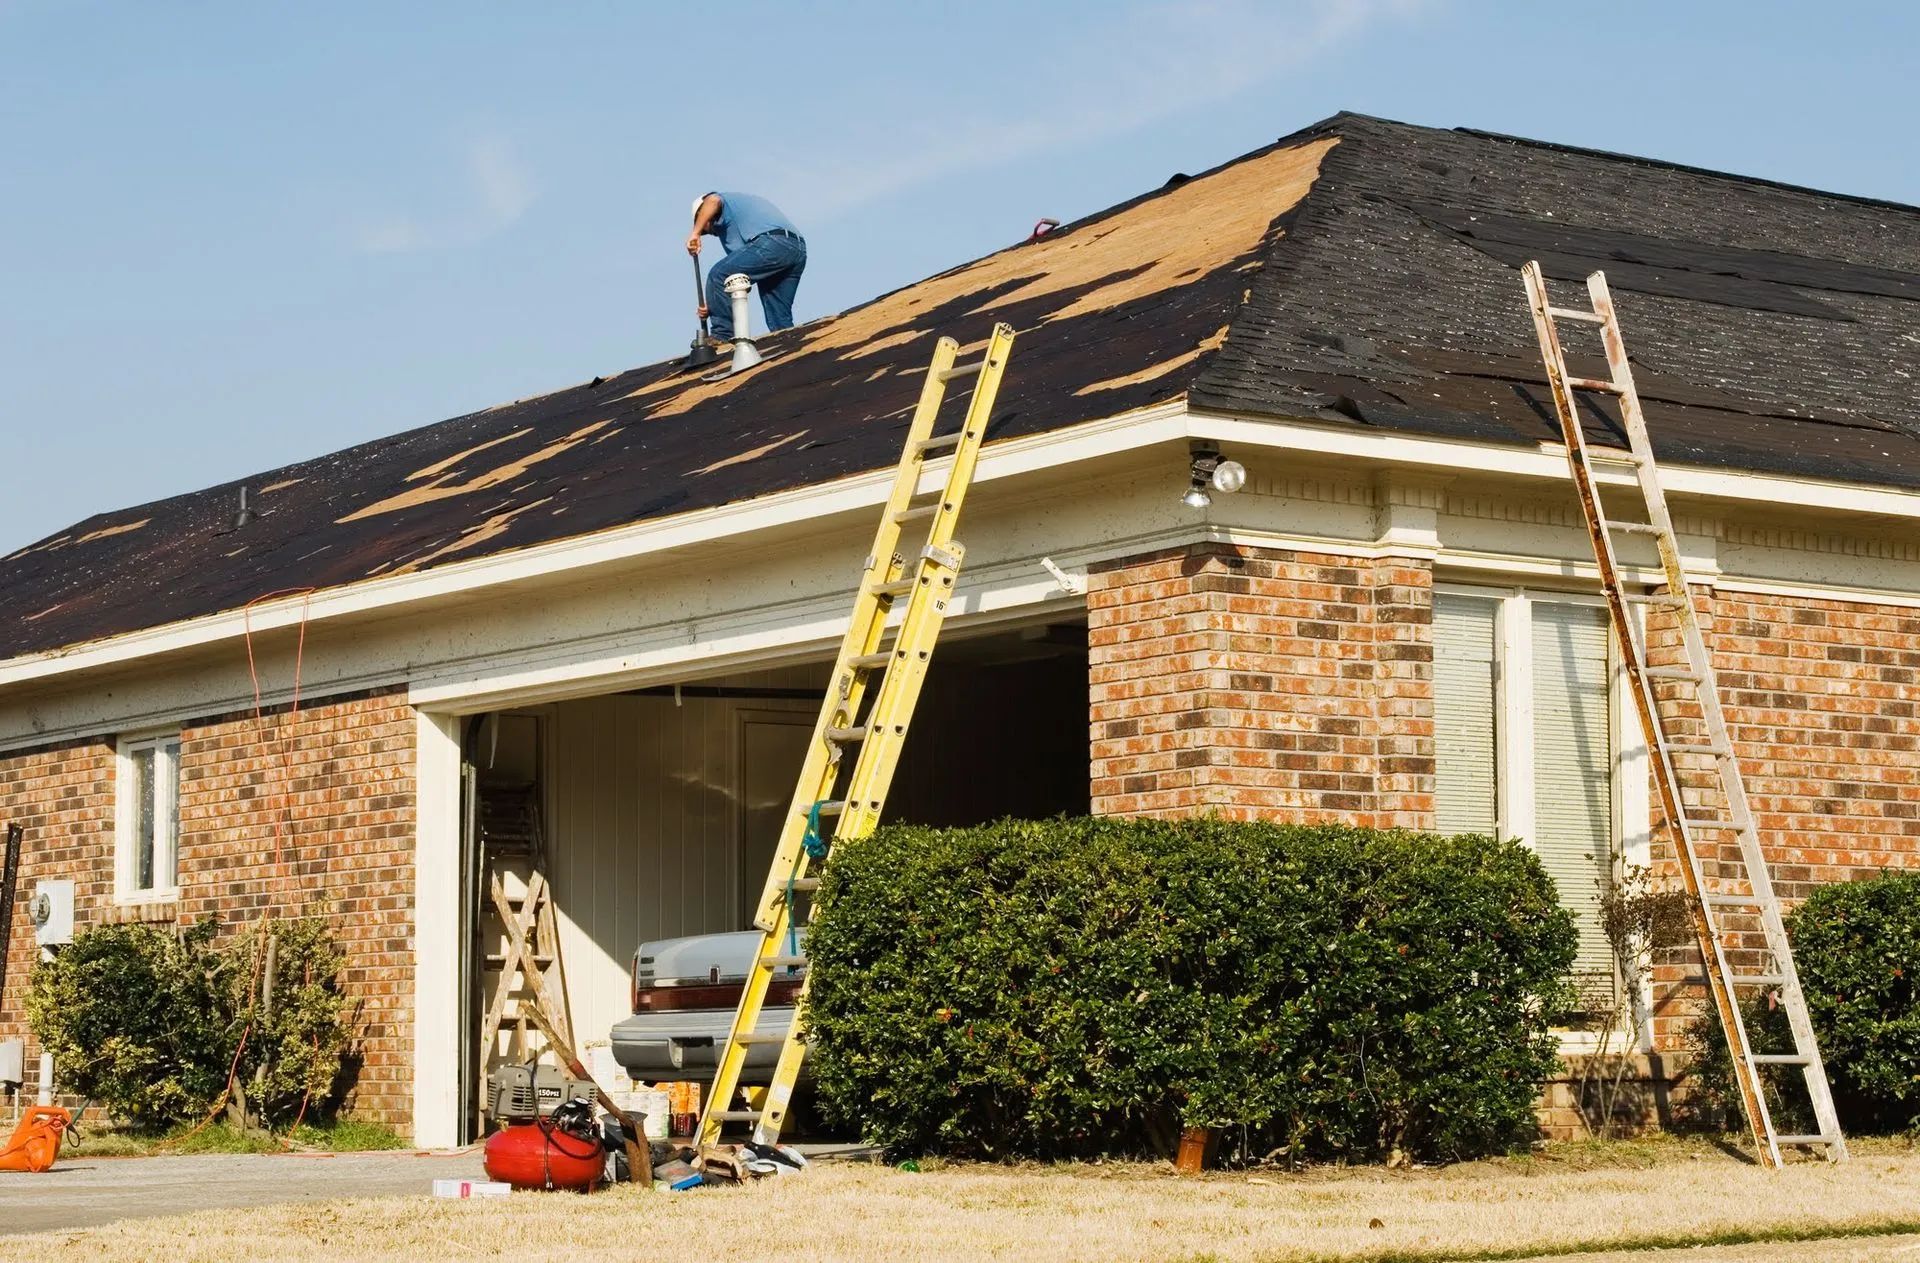 6 Ways To Get Your Roof Ready For The Next Hurricane